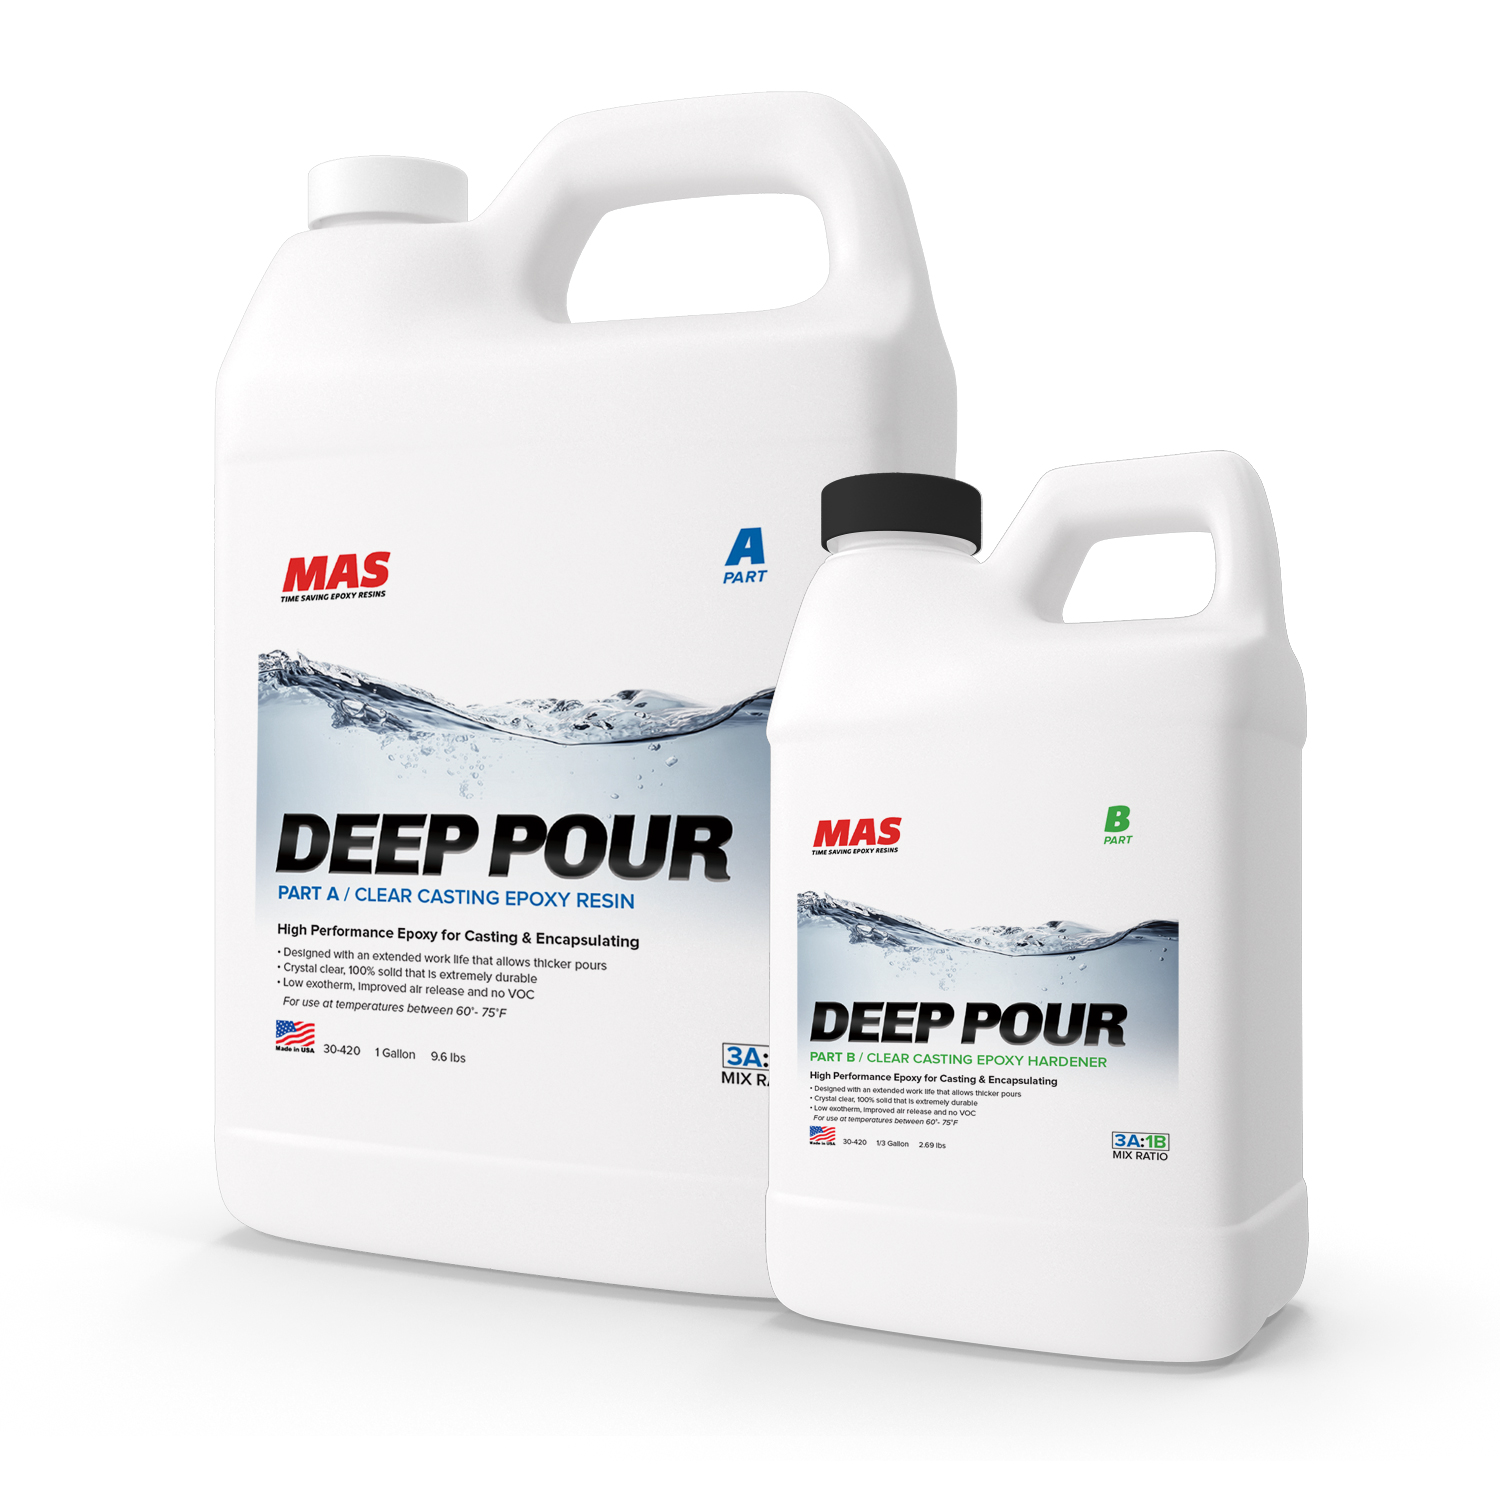 Is there a minimum thickness you can pour MAS deep pour epoxy, as in smaller cracks and hairline cracks in slab?